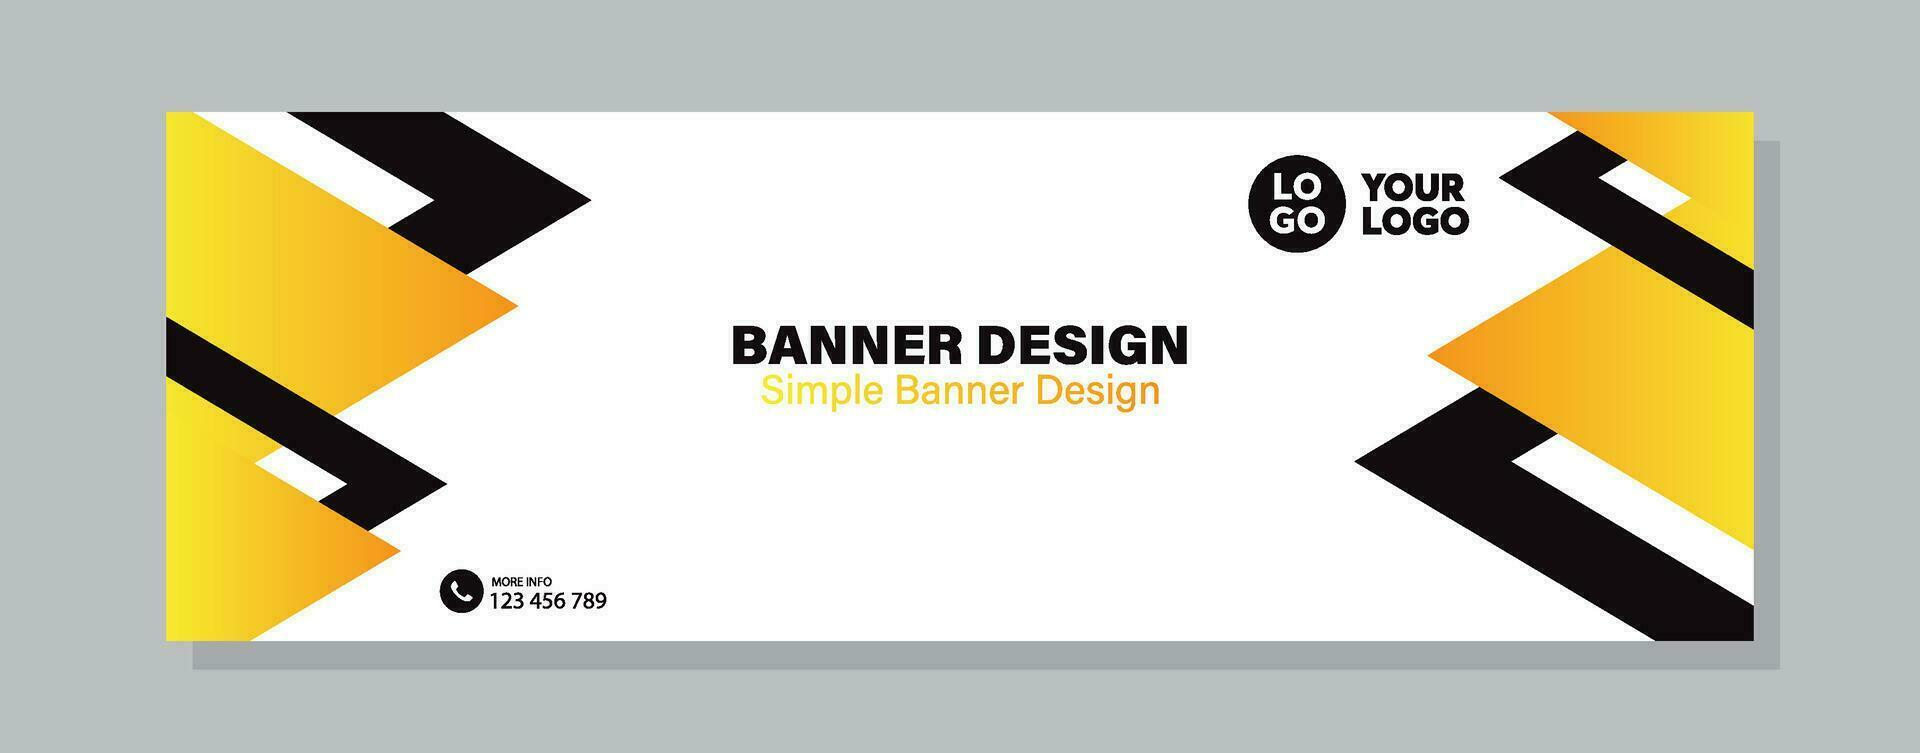 Modern abstract banner design template with geometric shapes. Applicable for Banners, Placards, Posters, Flyers vector